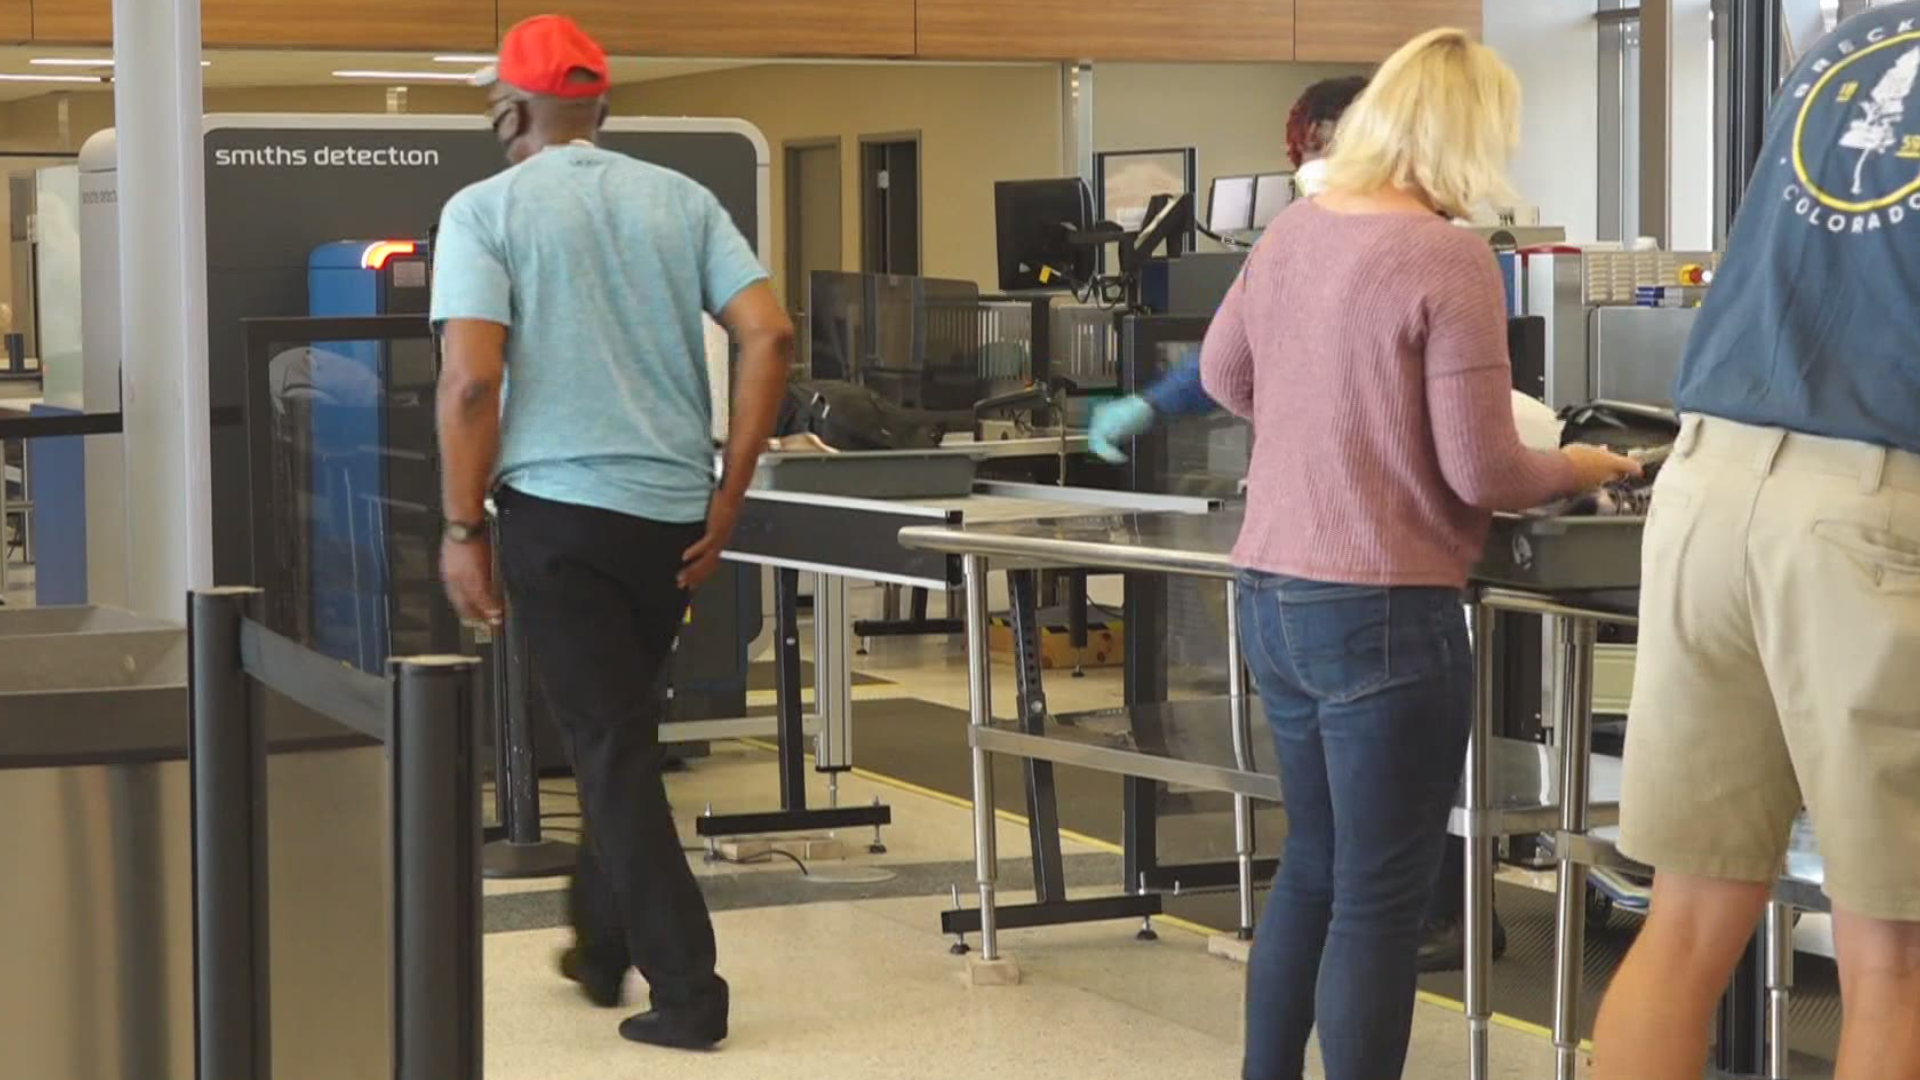 The airport is expecting to see an uptick in people traveling in the next few months.